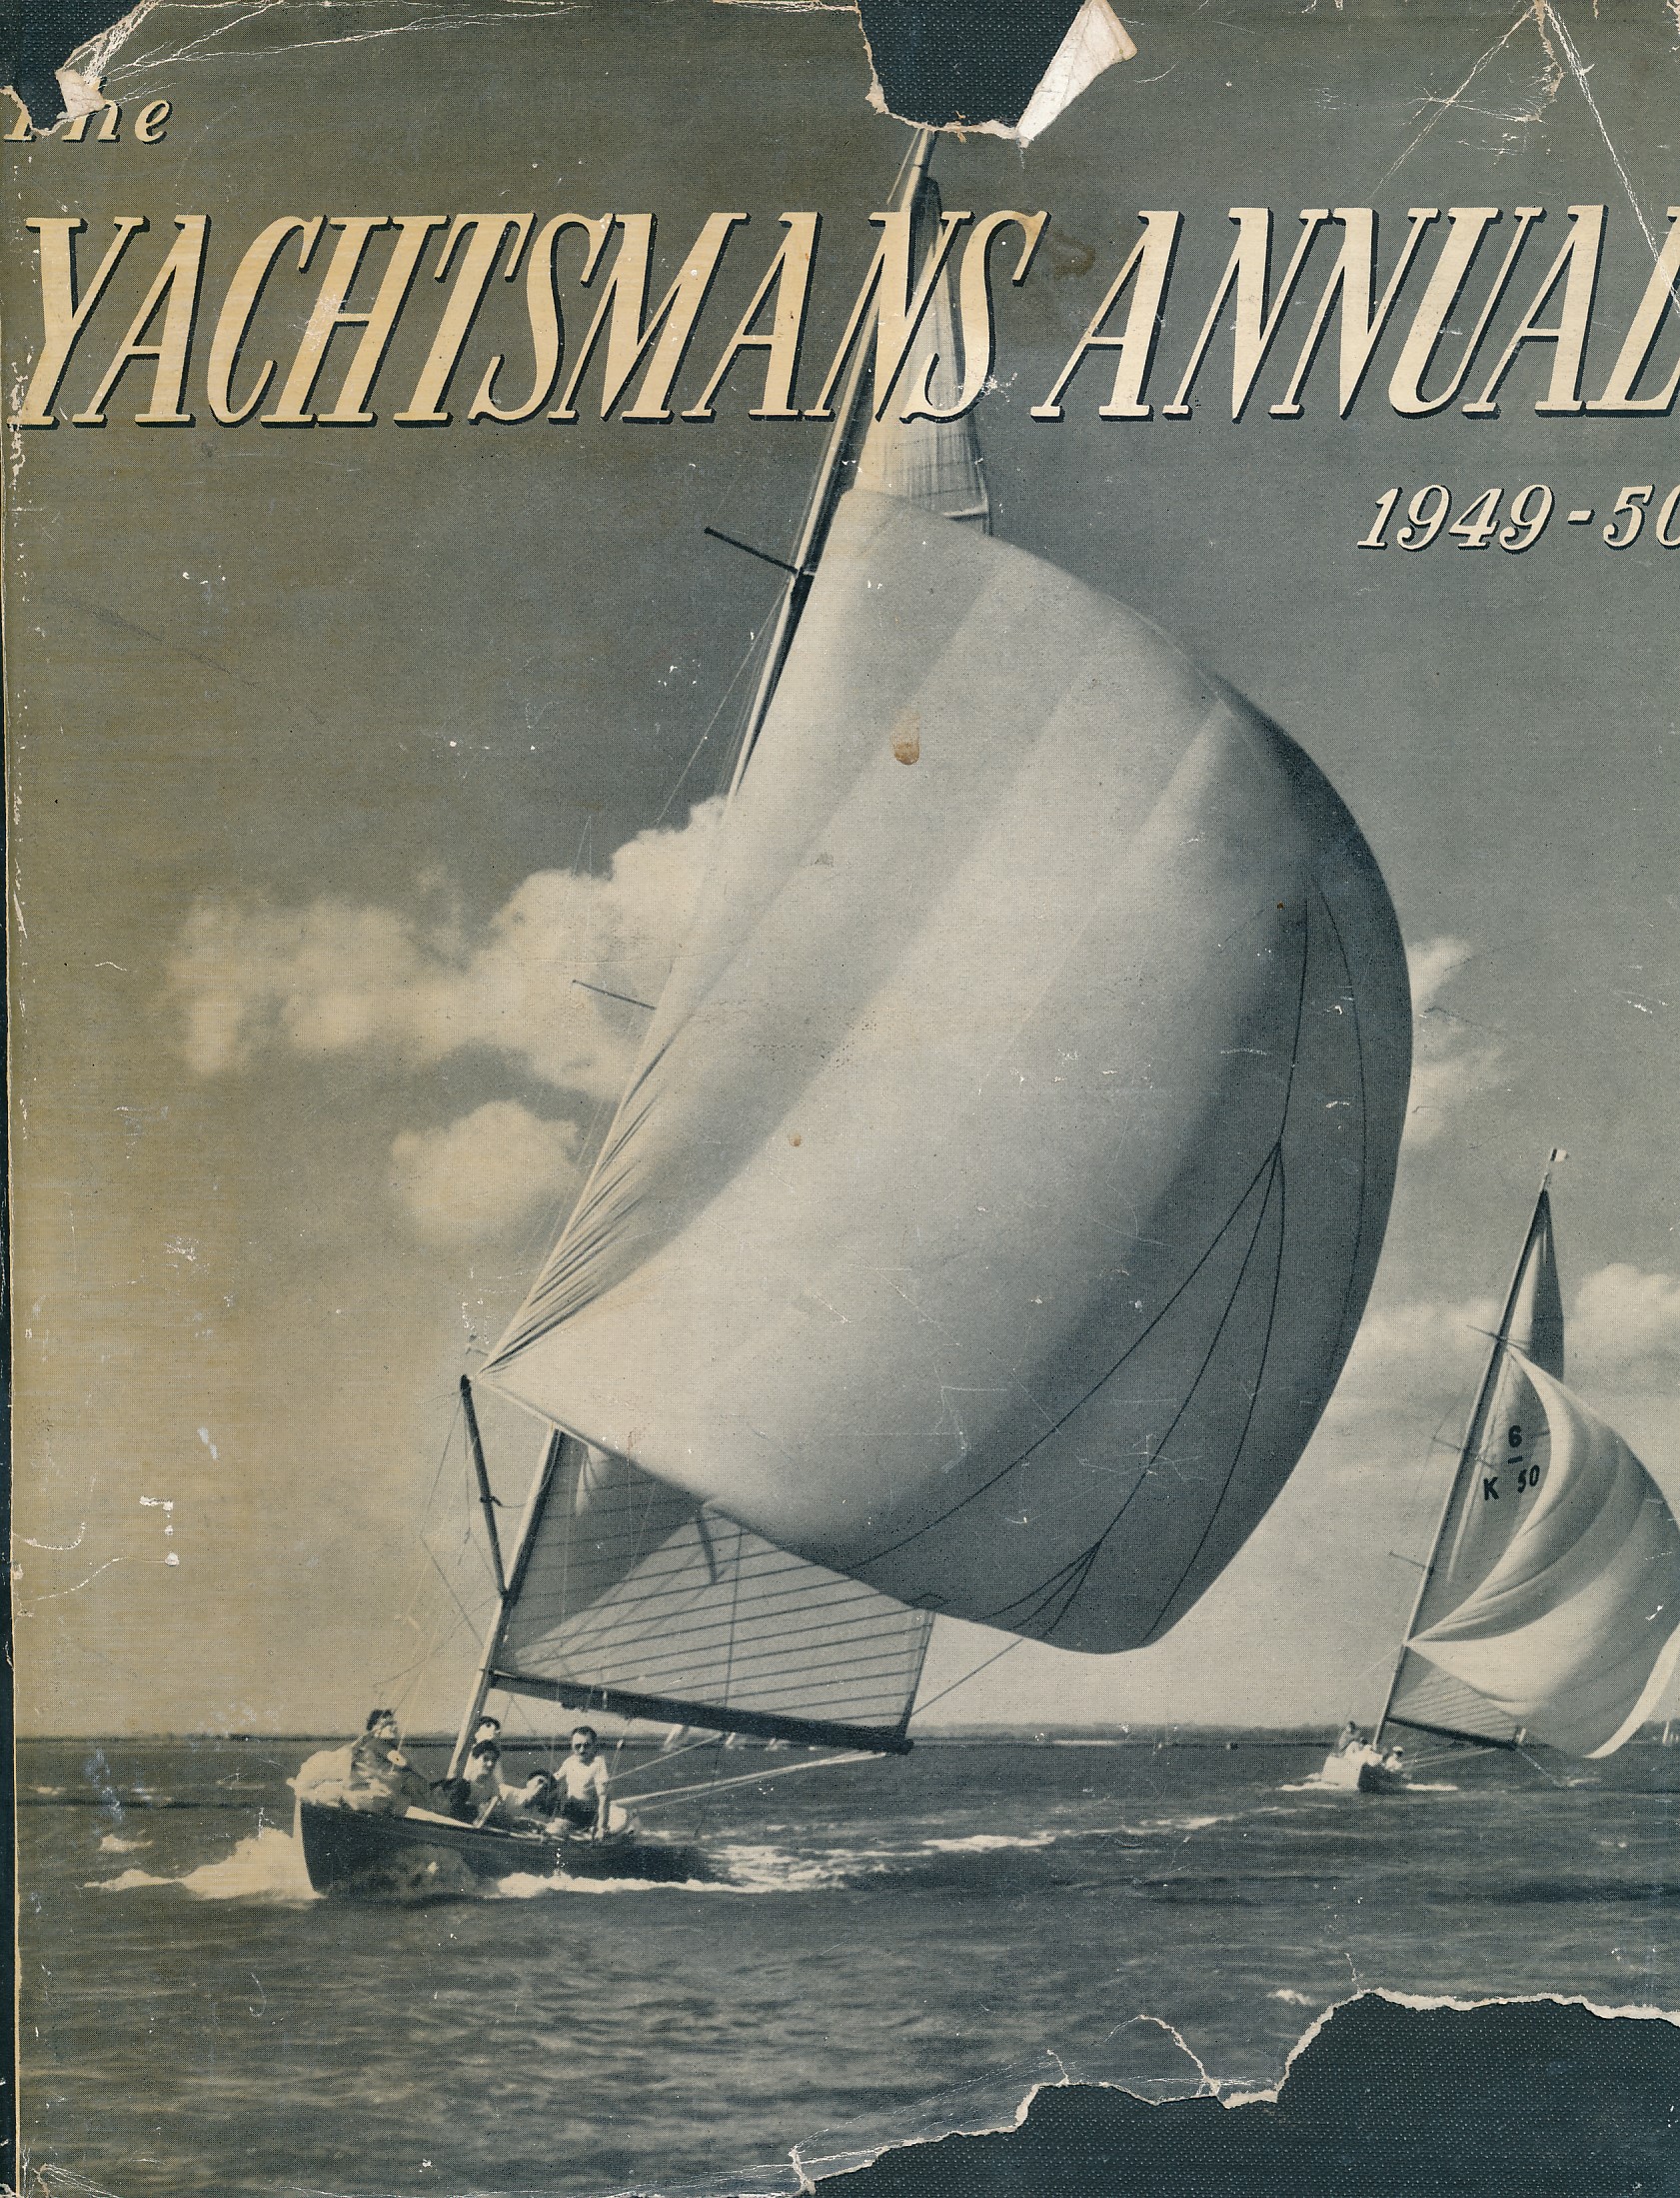 The Yachtsman's Annual 1949-50